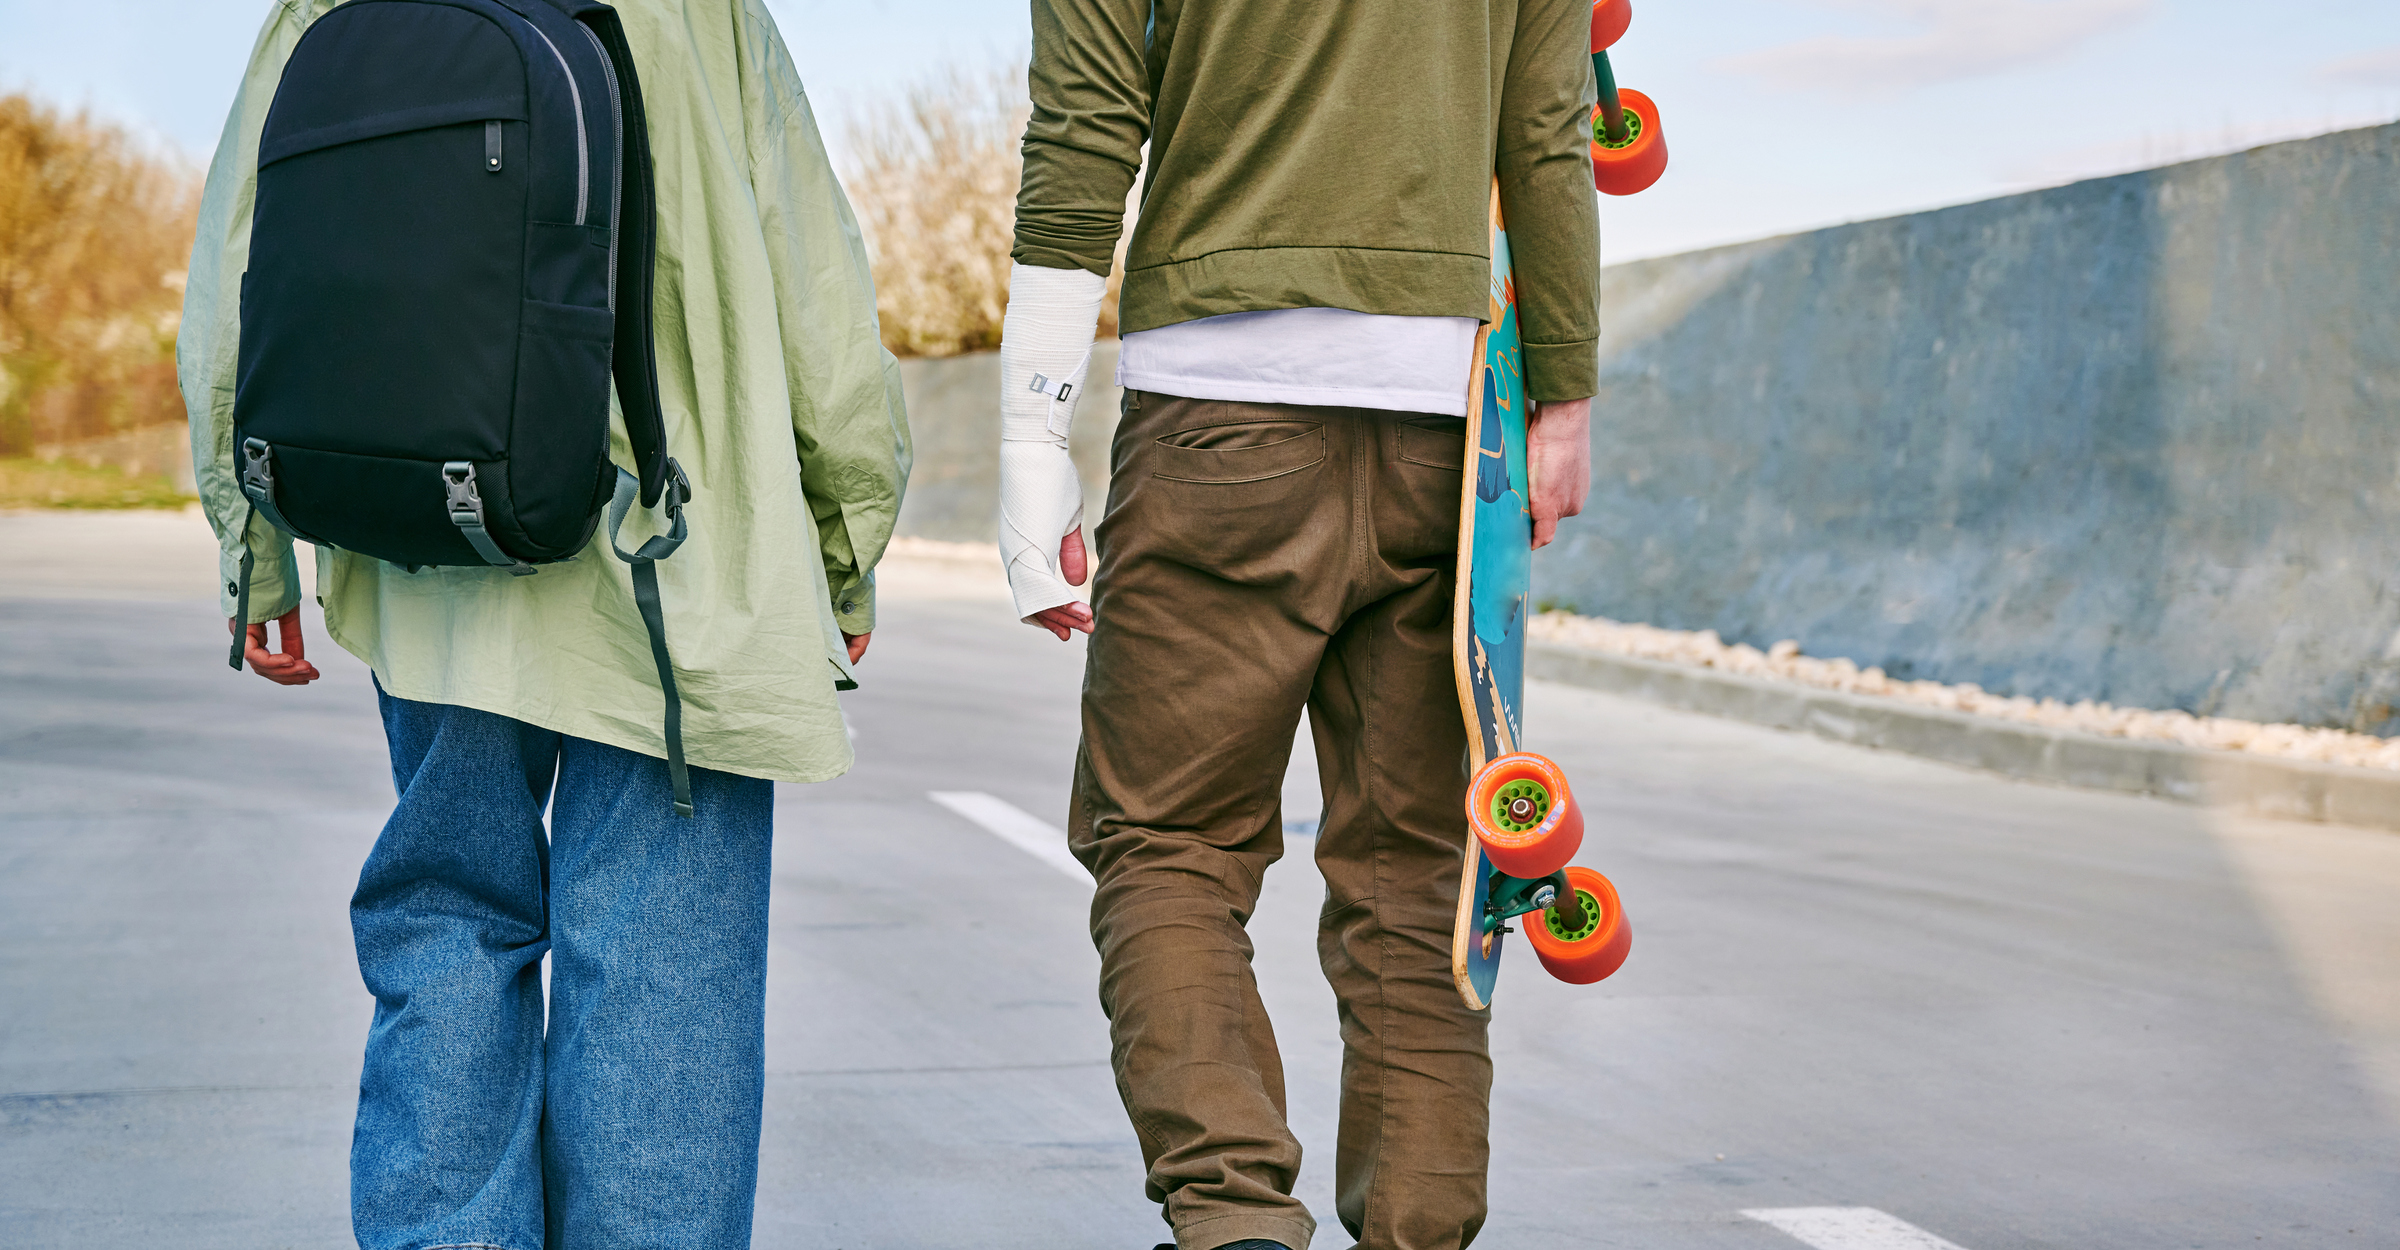 the backs of two teens are visible but not their heads, they are walking in a road and one of them is carrying a skateboard